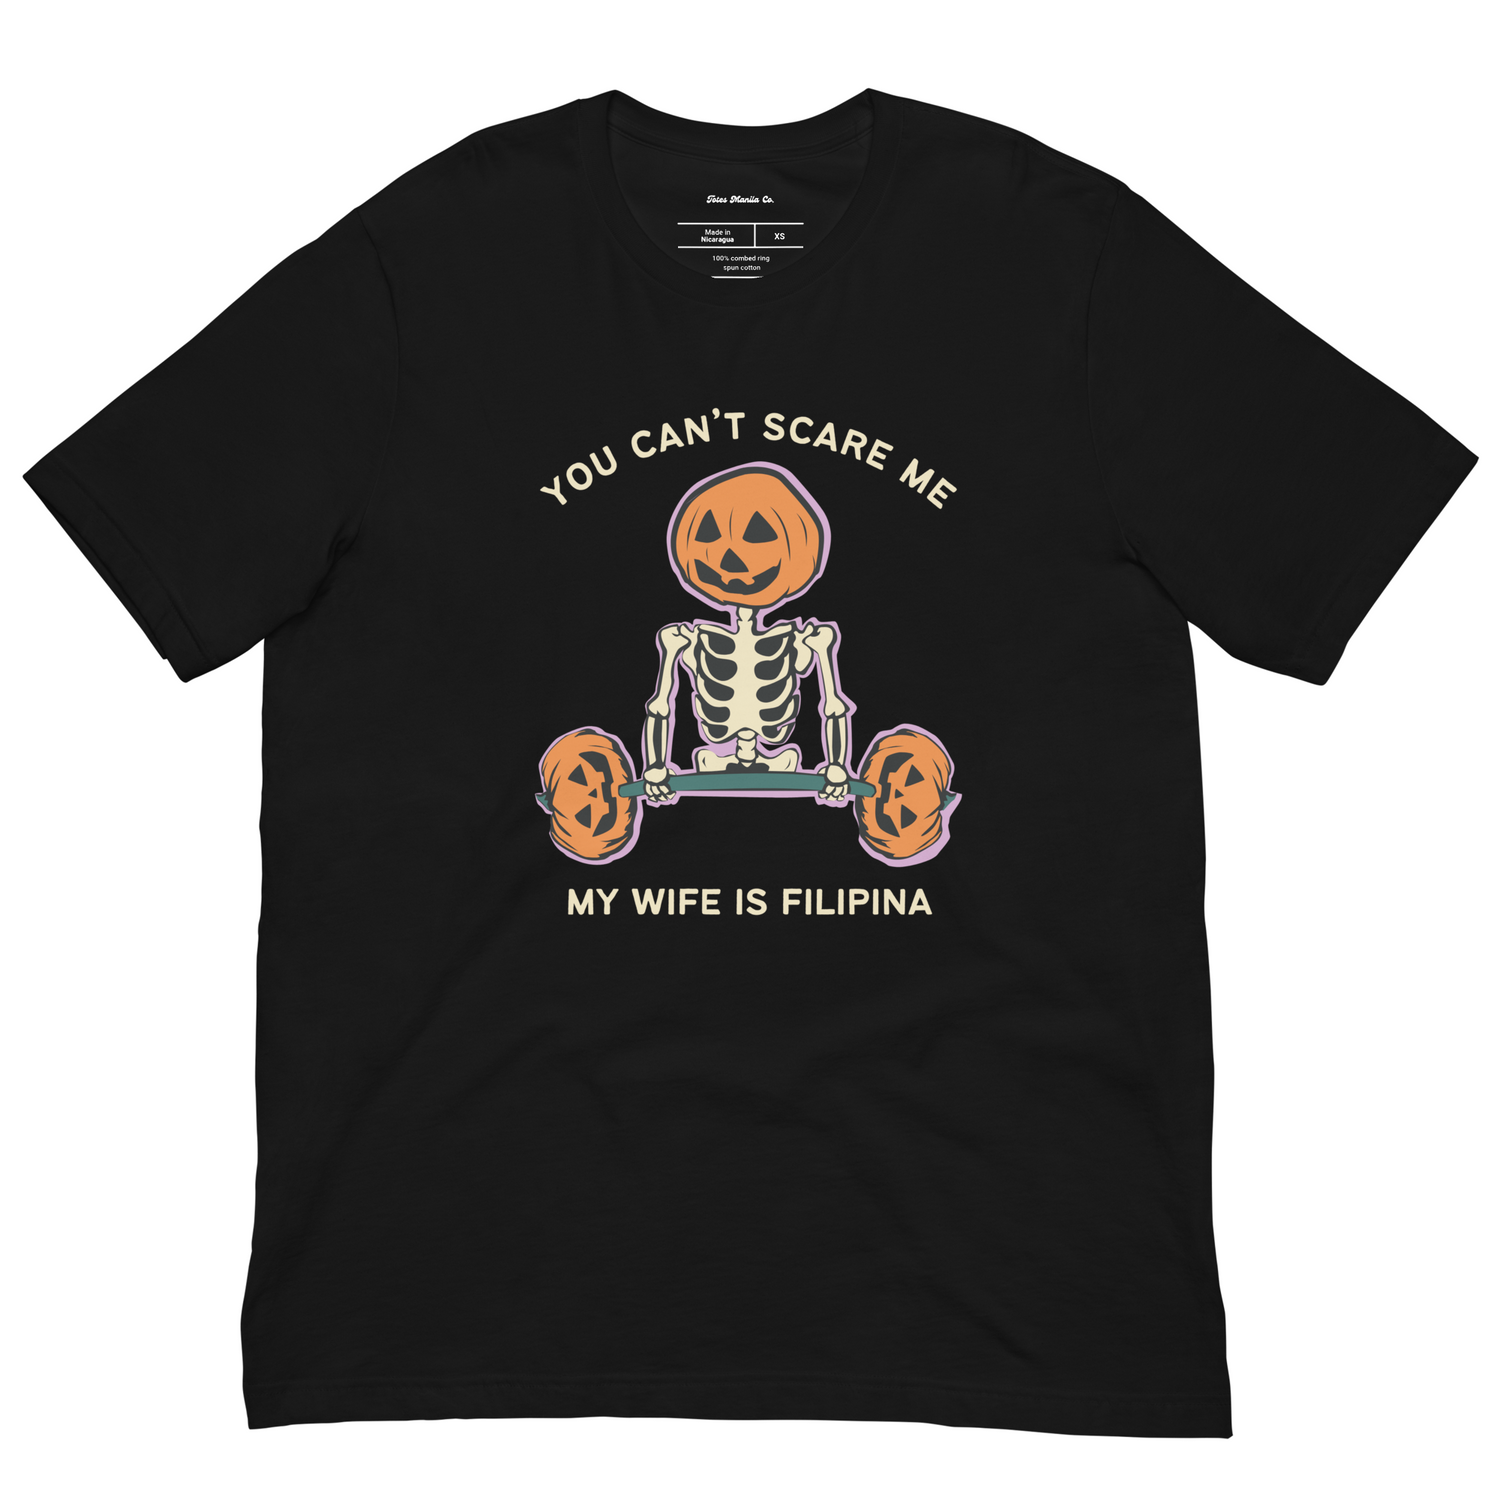 You Can't Scare Me My Wife Is Filipina Funny Halloween Shirt in Black